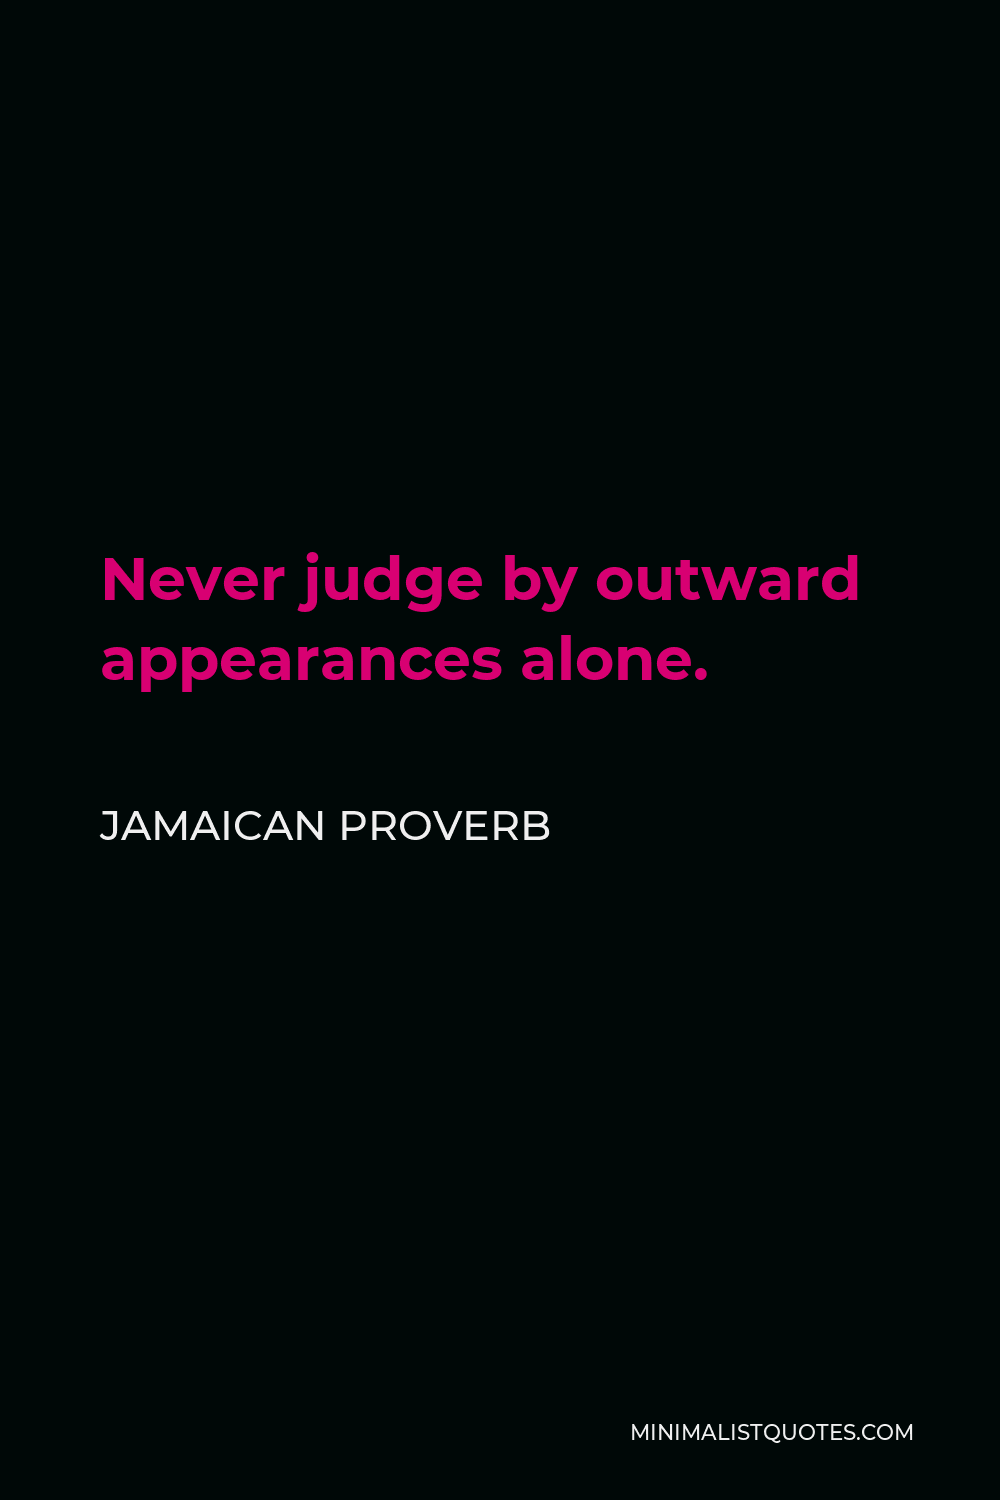 Jamaican Proverb Quote - Never judge by outward appearances alone.